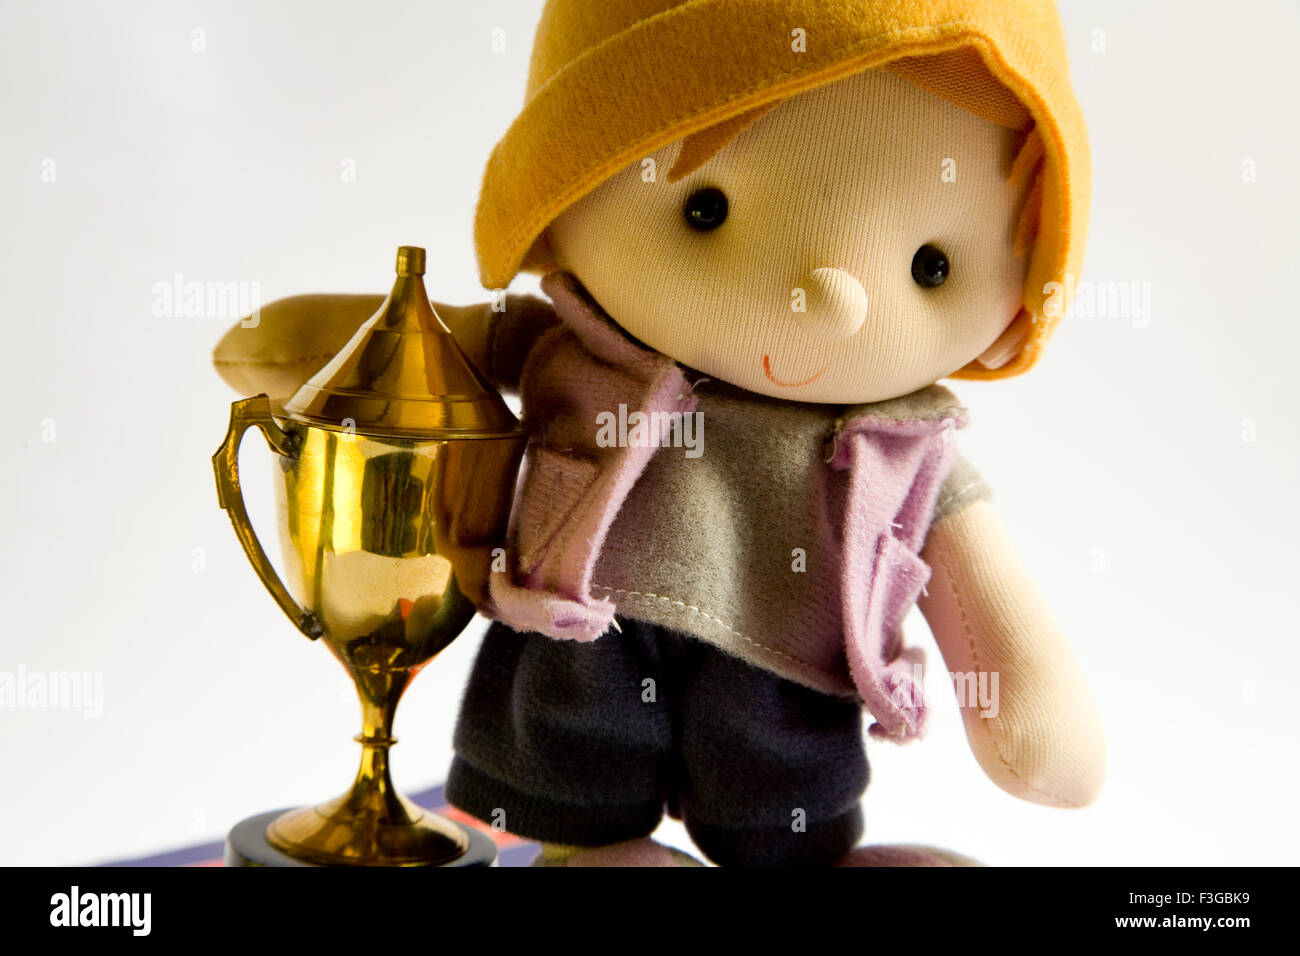 Soft toy boy with trophy on white background Stock Photo